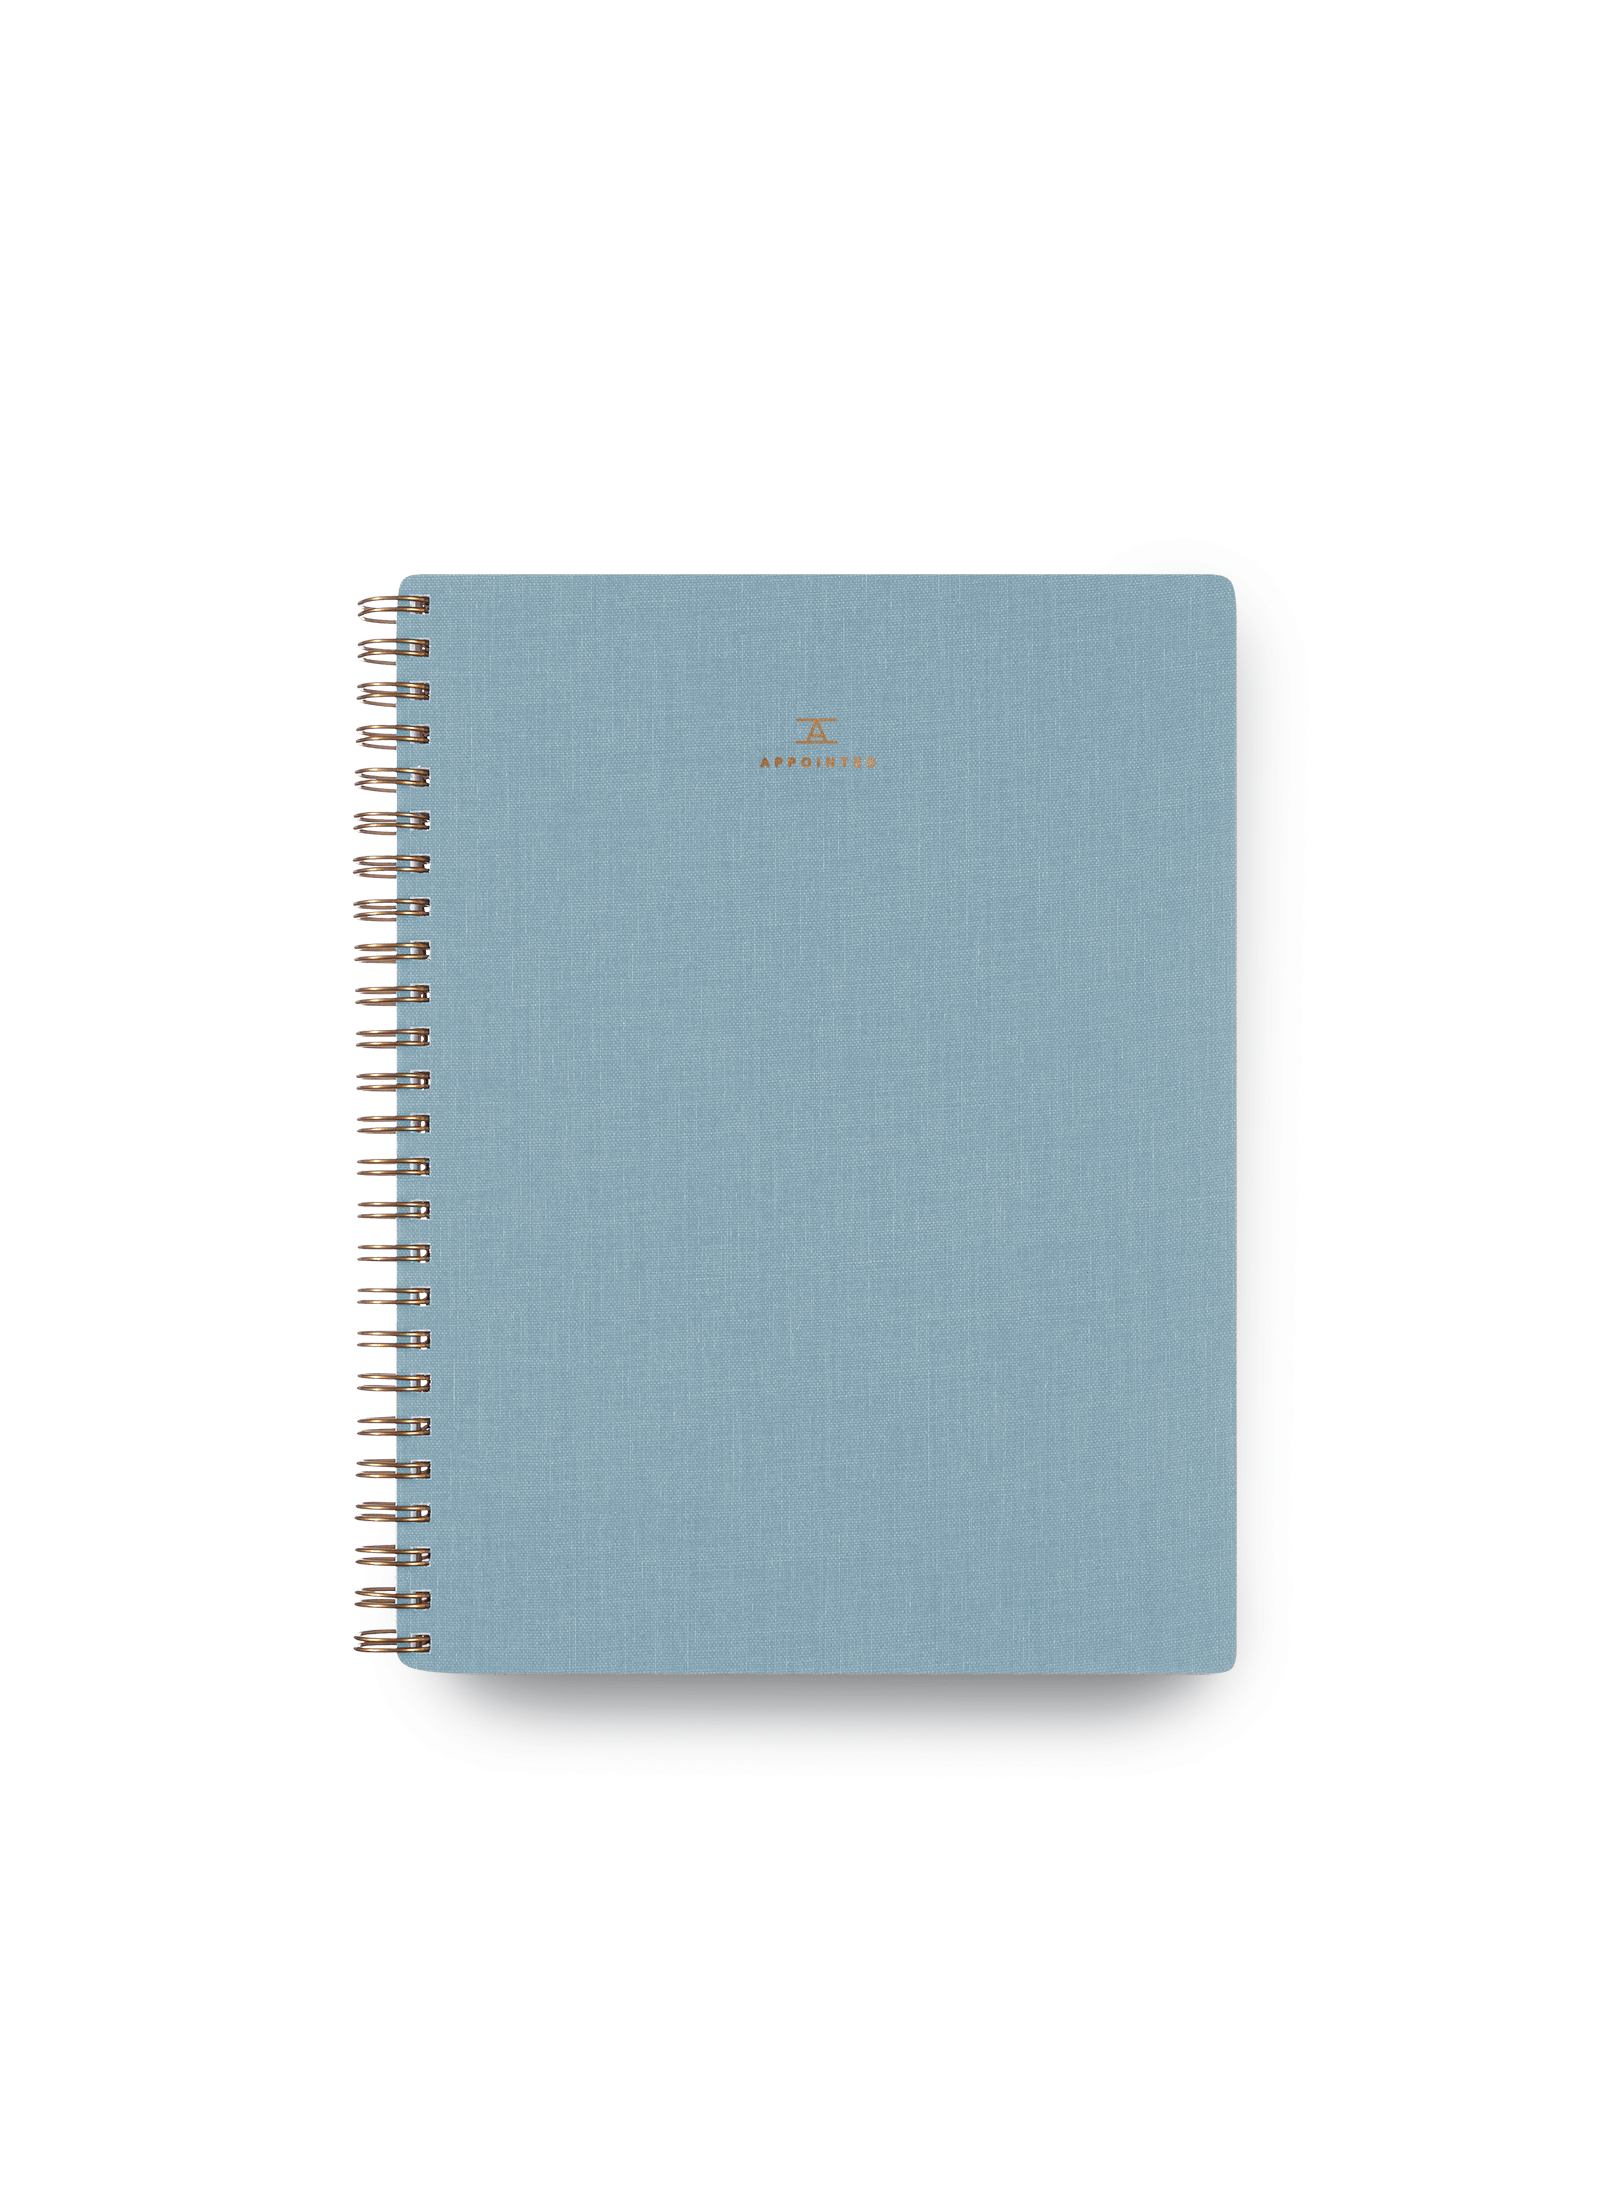 Appointed Workbook in Chambray Blue bookcloth with brass wire-o binding front cover || Chambray Blue